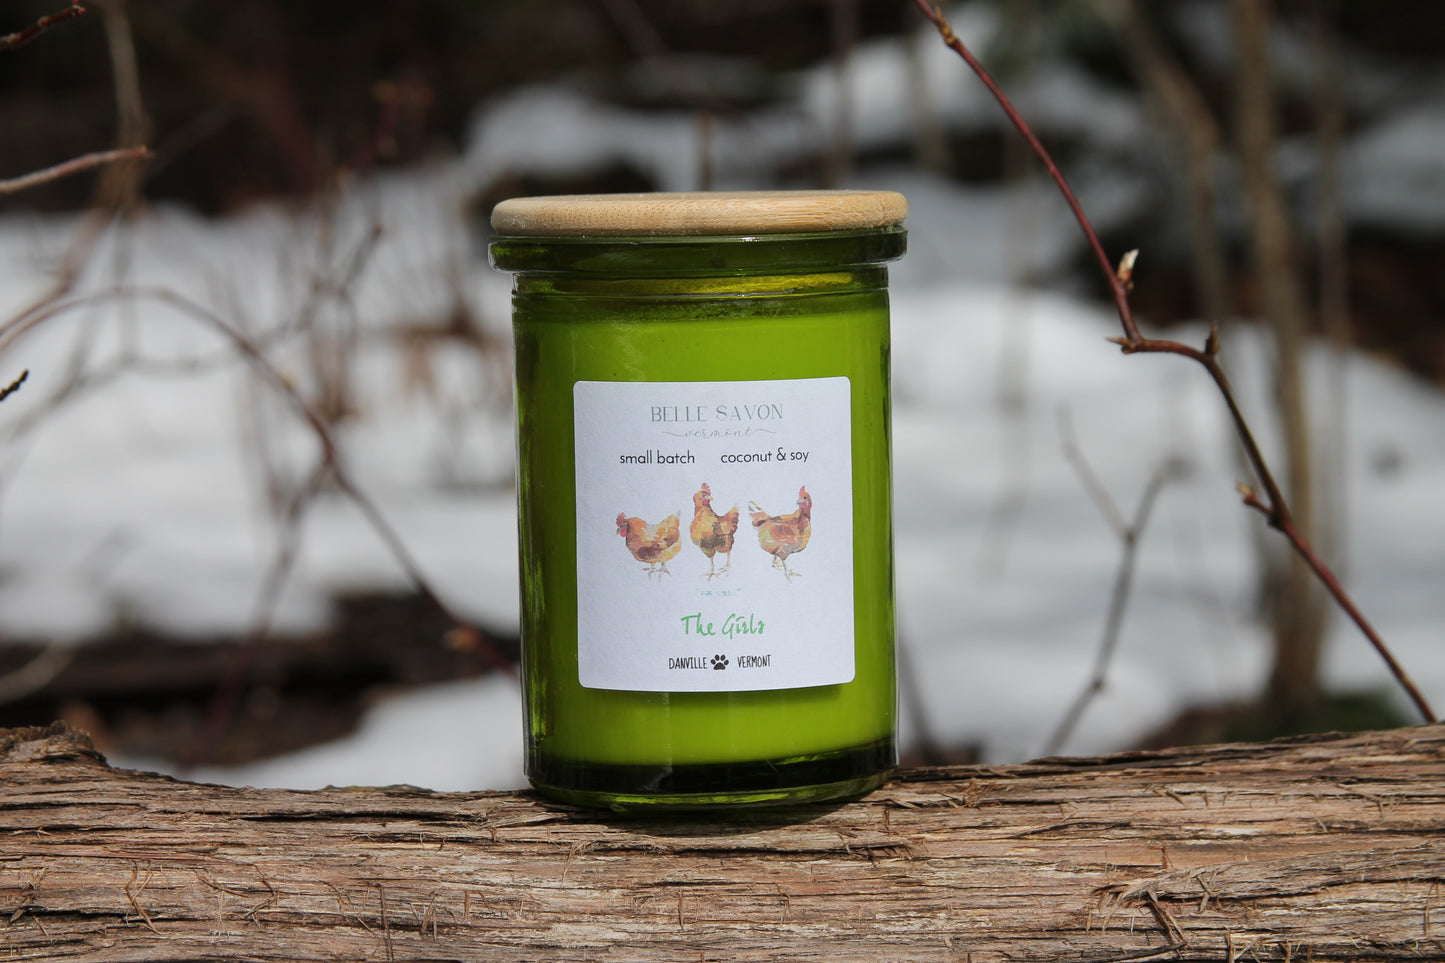 Vermont Series, Best of Vermont Hand poured Candle, Recycled Jar, Vermont Gift, Intentional, Minimalist